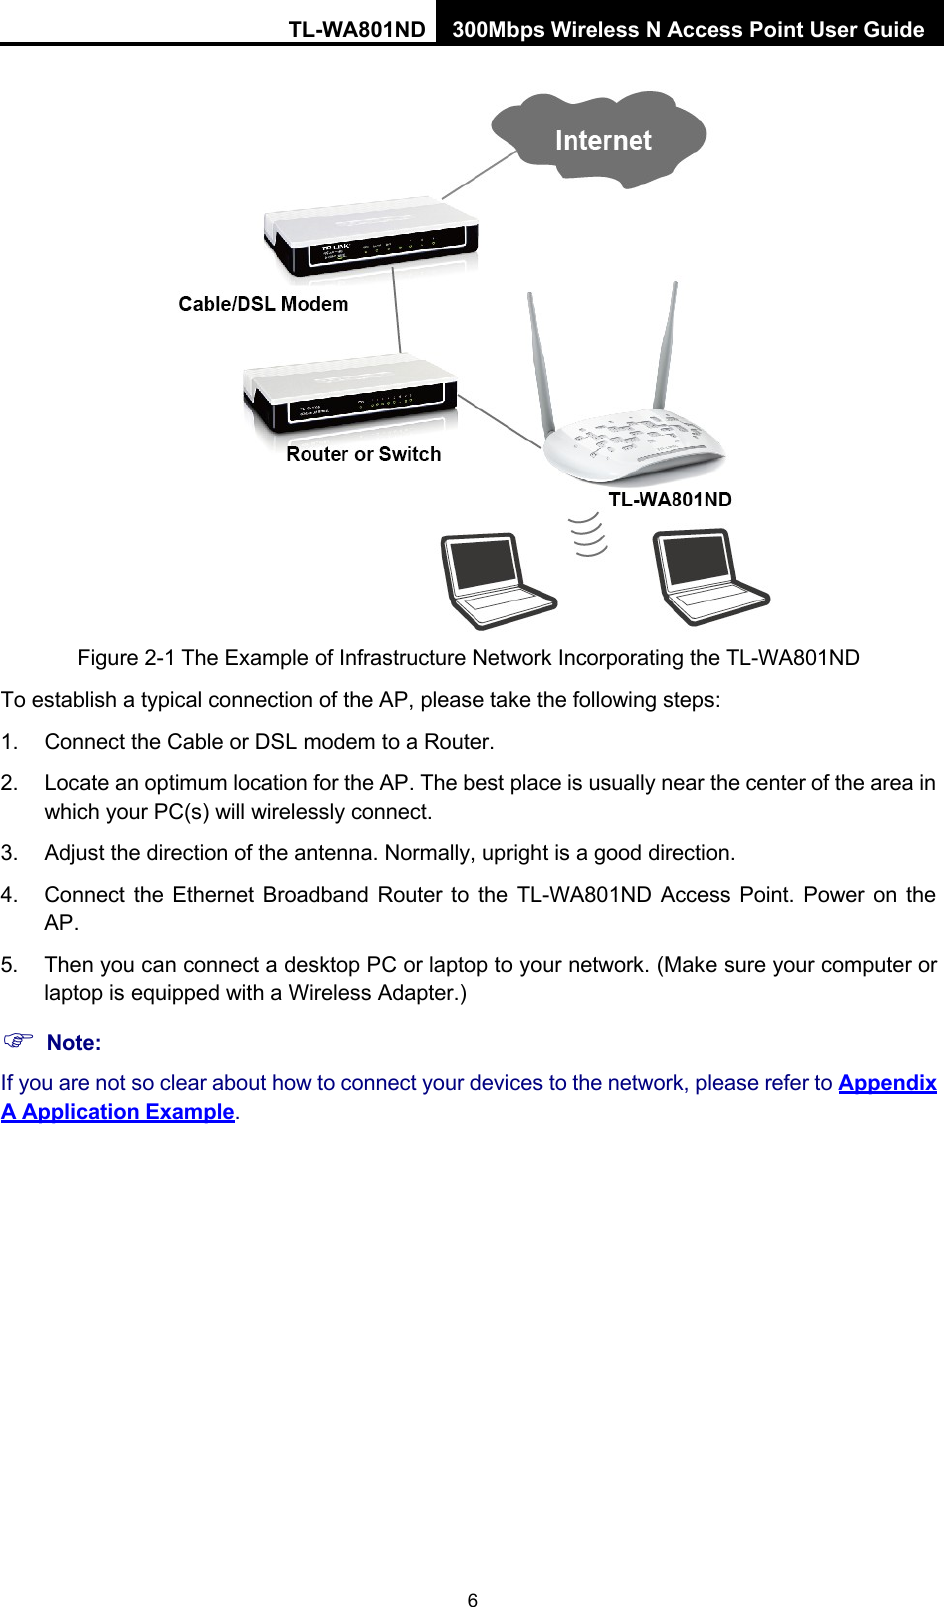 TL-WA801ND 300Mbps Wireless N Access Point User Guide 6      Figure 2-1 The Example of Infrastructure Network Incorporating the TL-WA801ND To establish a typical connection of the AP, please take the following steps: 1. Connect the Cable or DSL modem to a Router. 2. Locate an optimum location for the AP. The best place is usually near the center of the area in which your PC(s) will wirelessly connect. 3. Adjust the direction of the antenna. Normally, upright is a good direction. 4. Connect the Ethernet Broadband Router to the TL-WA801ND Access Point. Power on the AP. 5. Then you can connect a desktop PC or laptop to your network. (Make sure your computer or laptop is equipped with a Wireless Adapter.)  Note: If you are not so clear about how to connect your devices to the network, please refer to Appendix  A Application Example. 